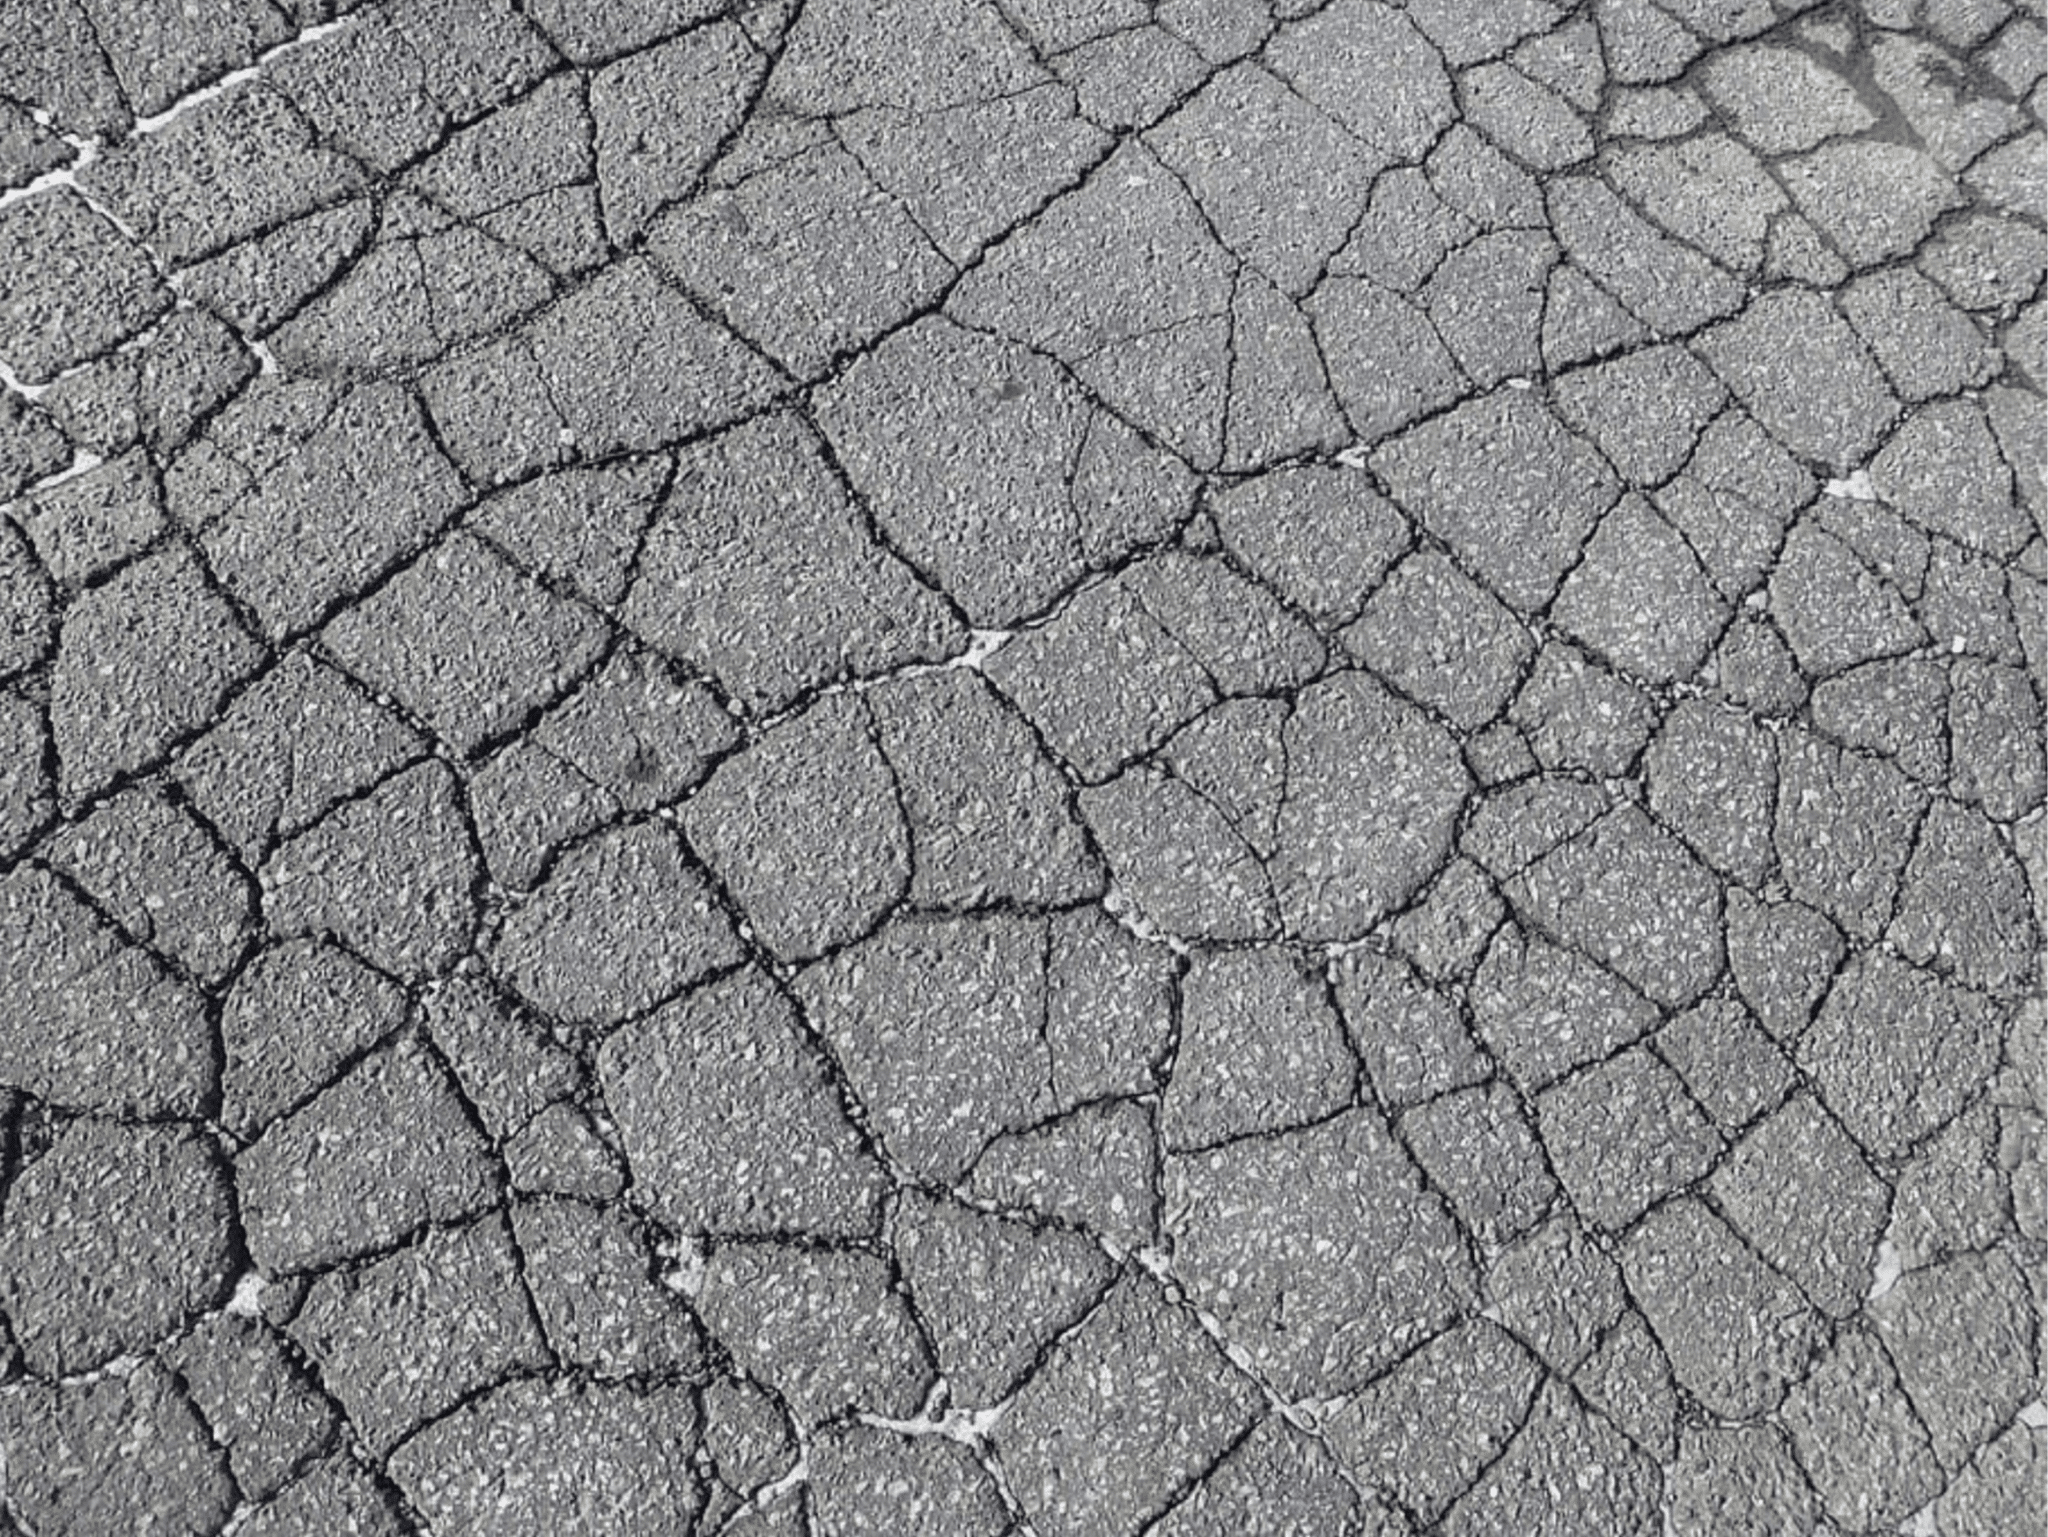 The Enemy at Your Feet: Common Types of Pavement Damage